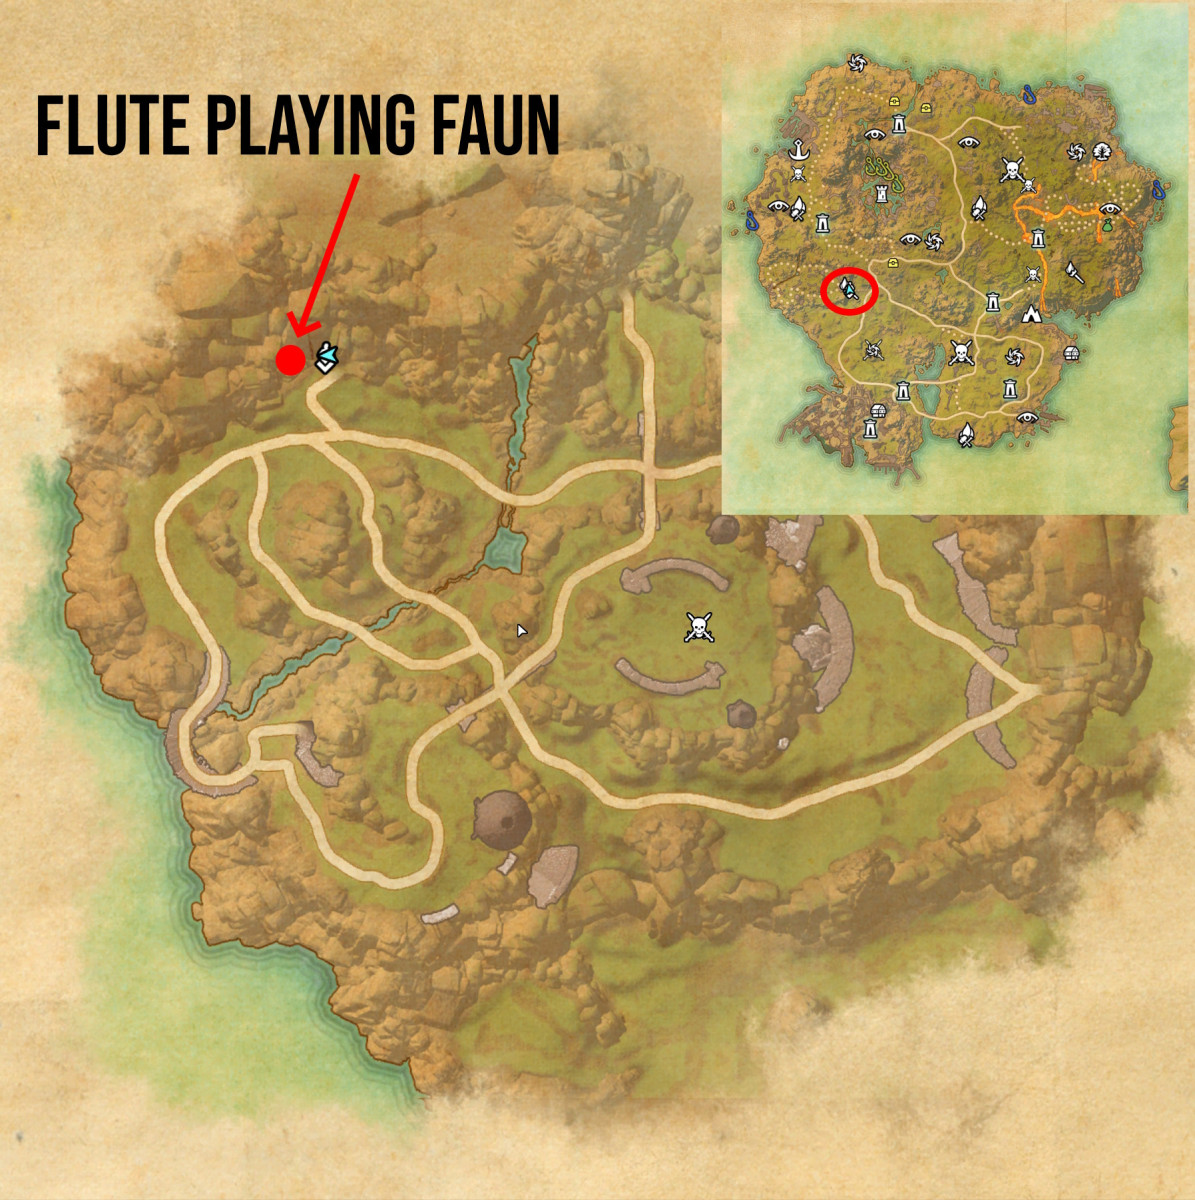 The flute playing faun location map on Galen